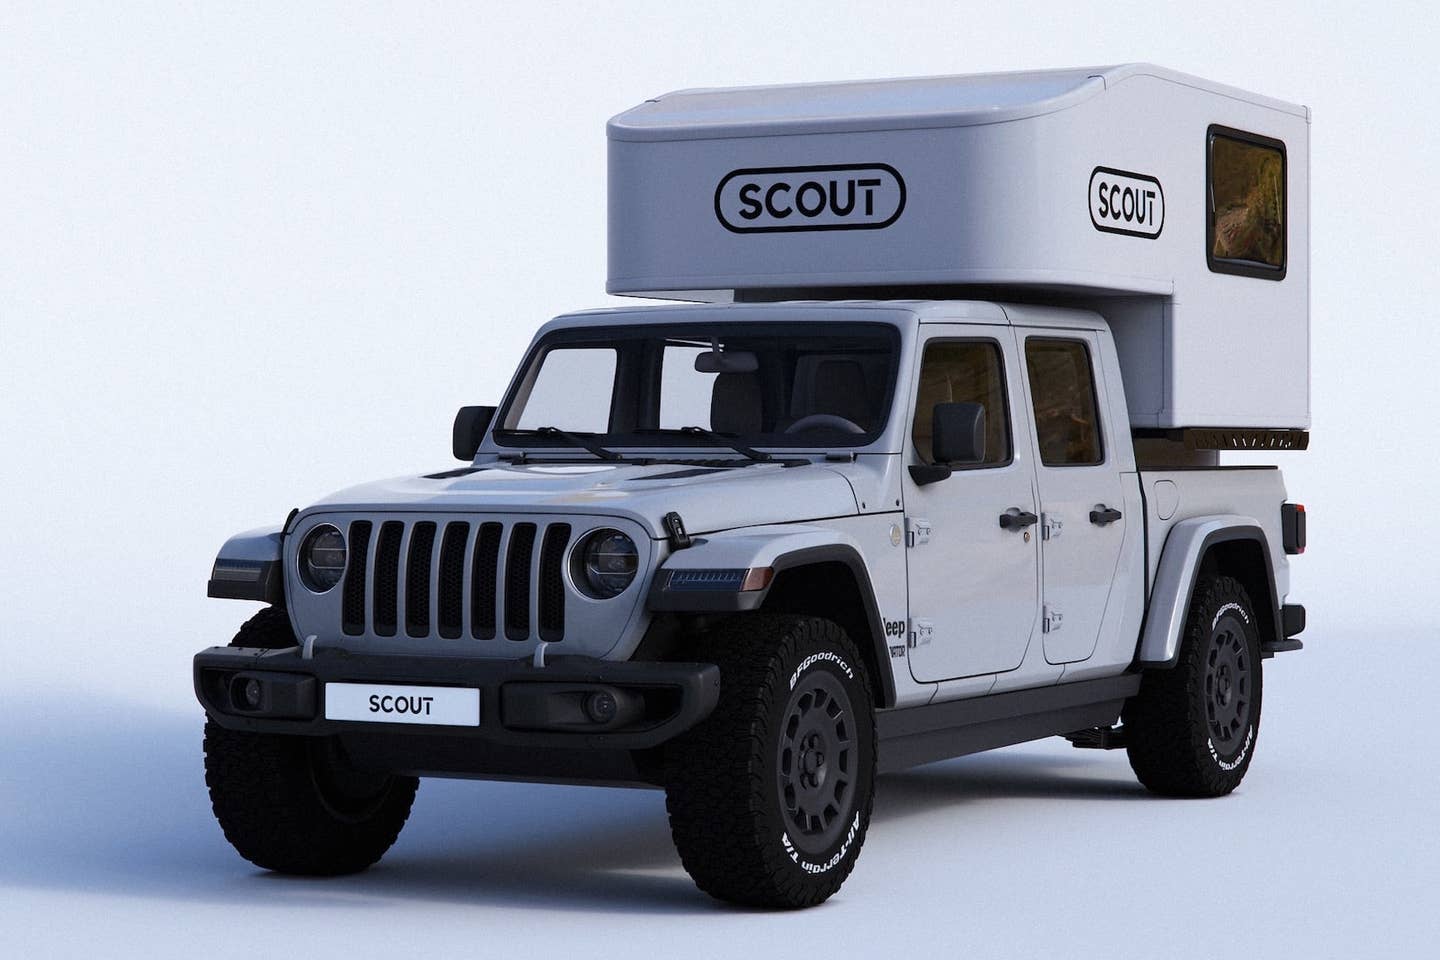 Scout Tuktut camper on a Jeep Gladiator